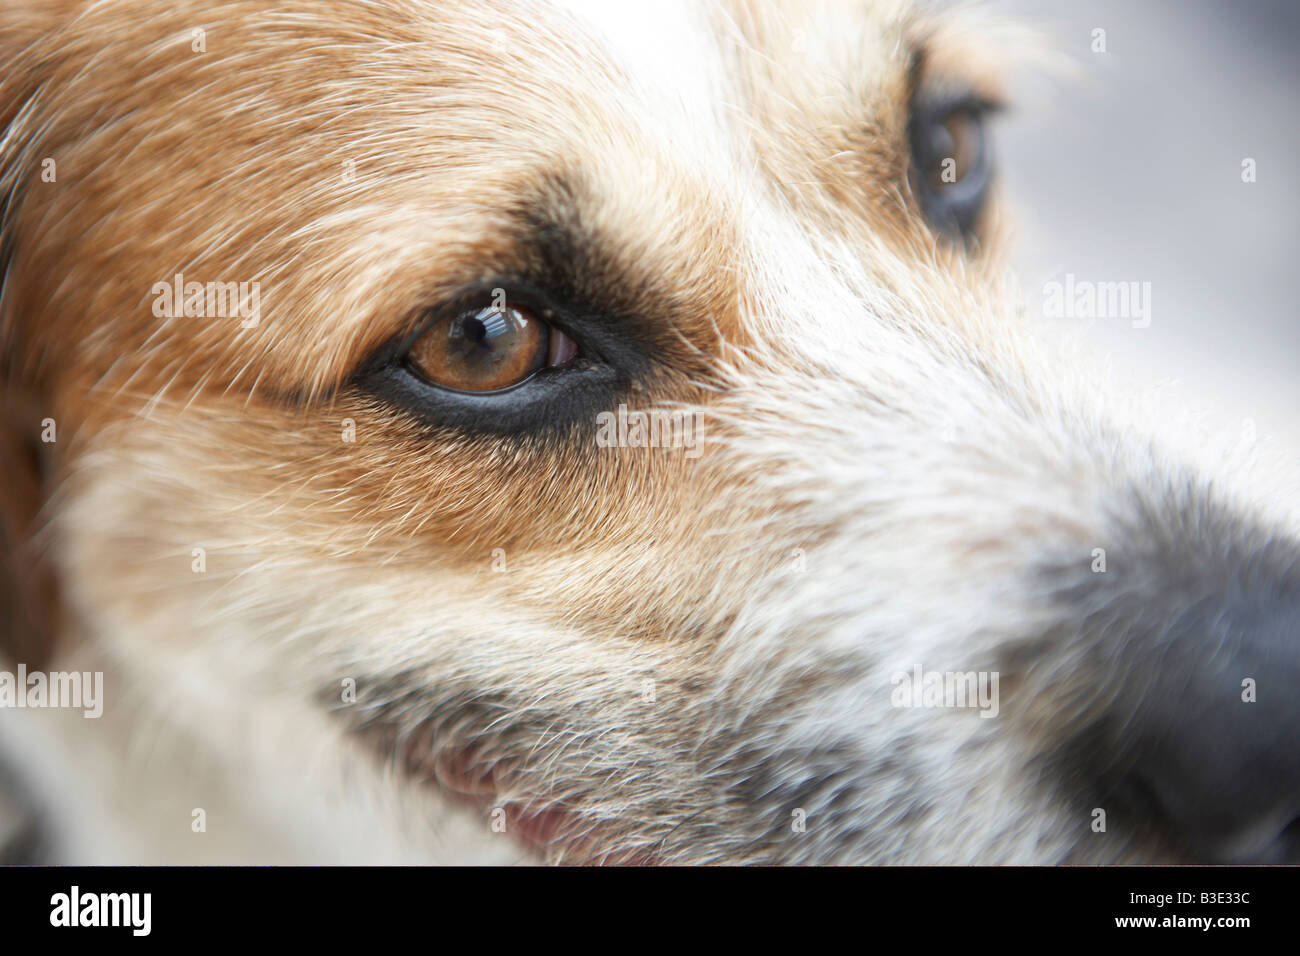 Jack Russell Terrier, close-up Stock Photo